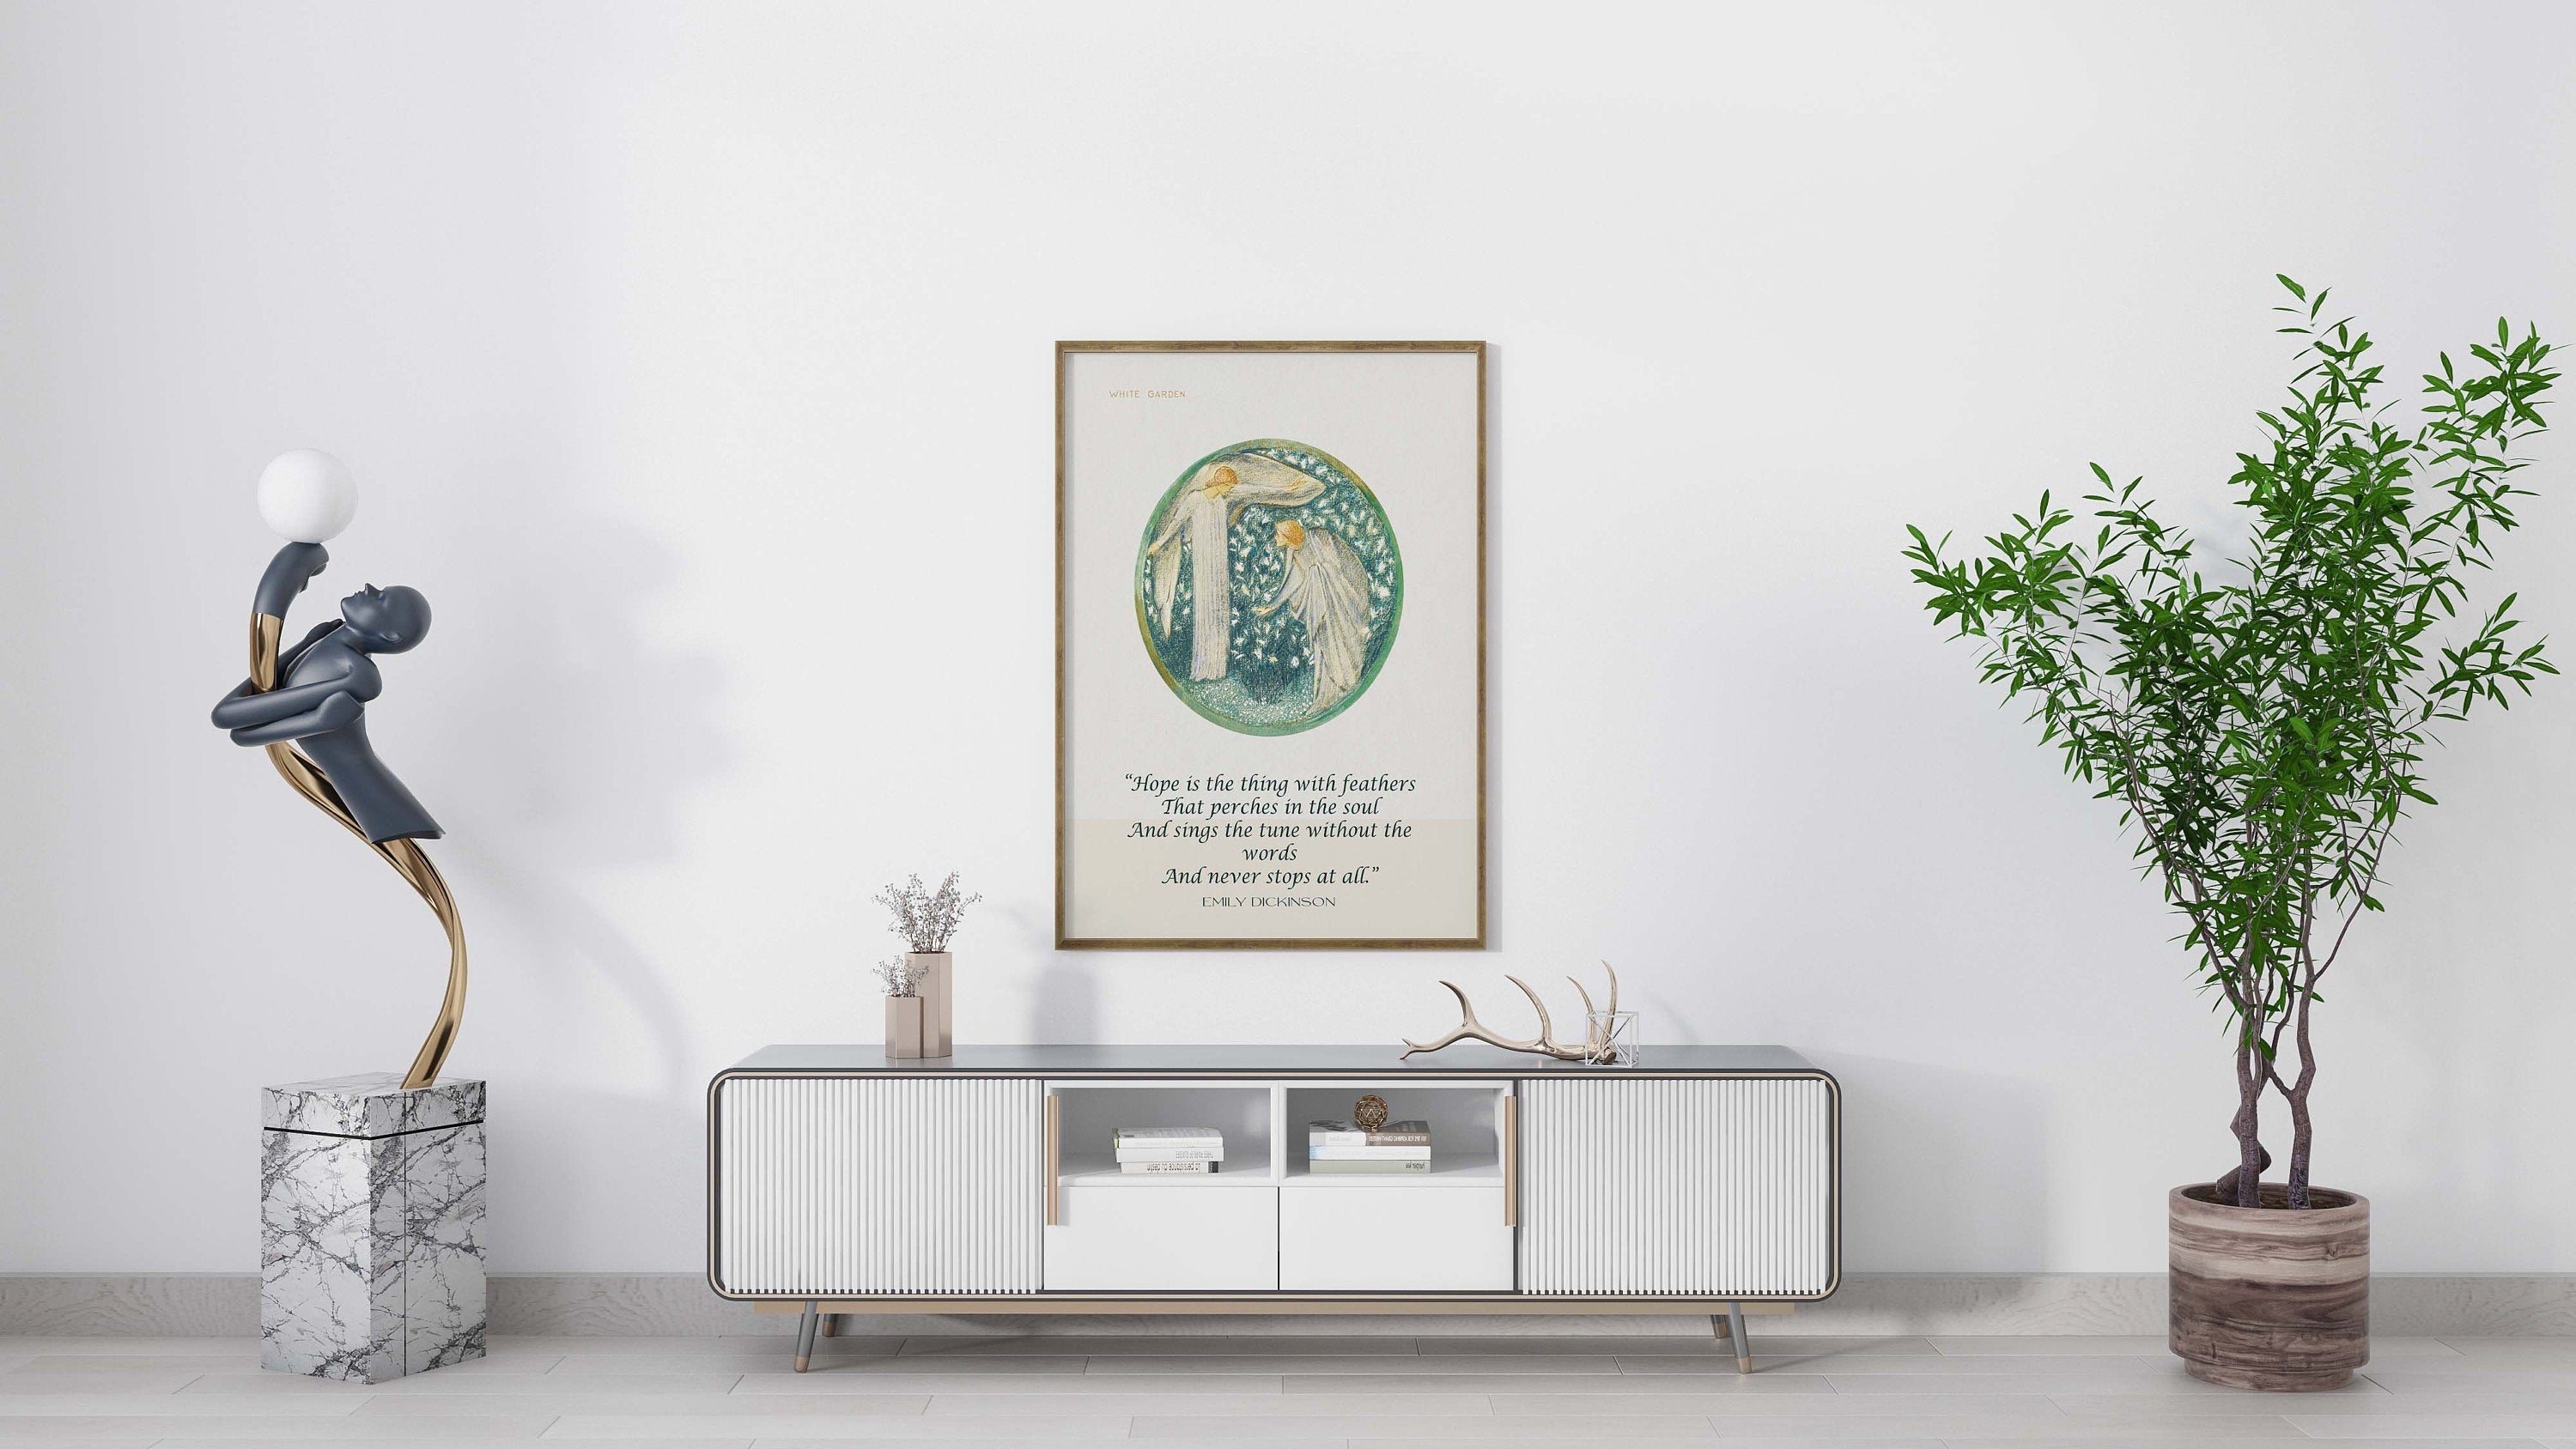 Emily Dickinson - Edward Burne–Jones -Fine Art Print - Hope is the thing with feathers